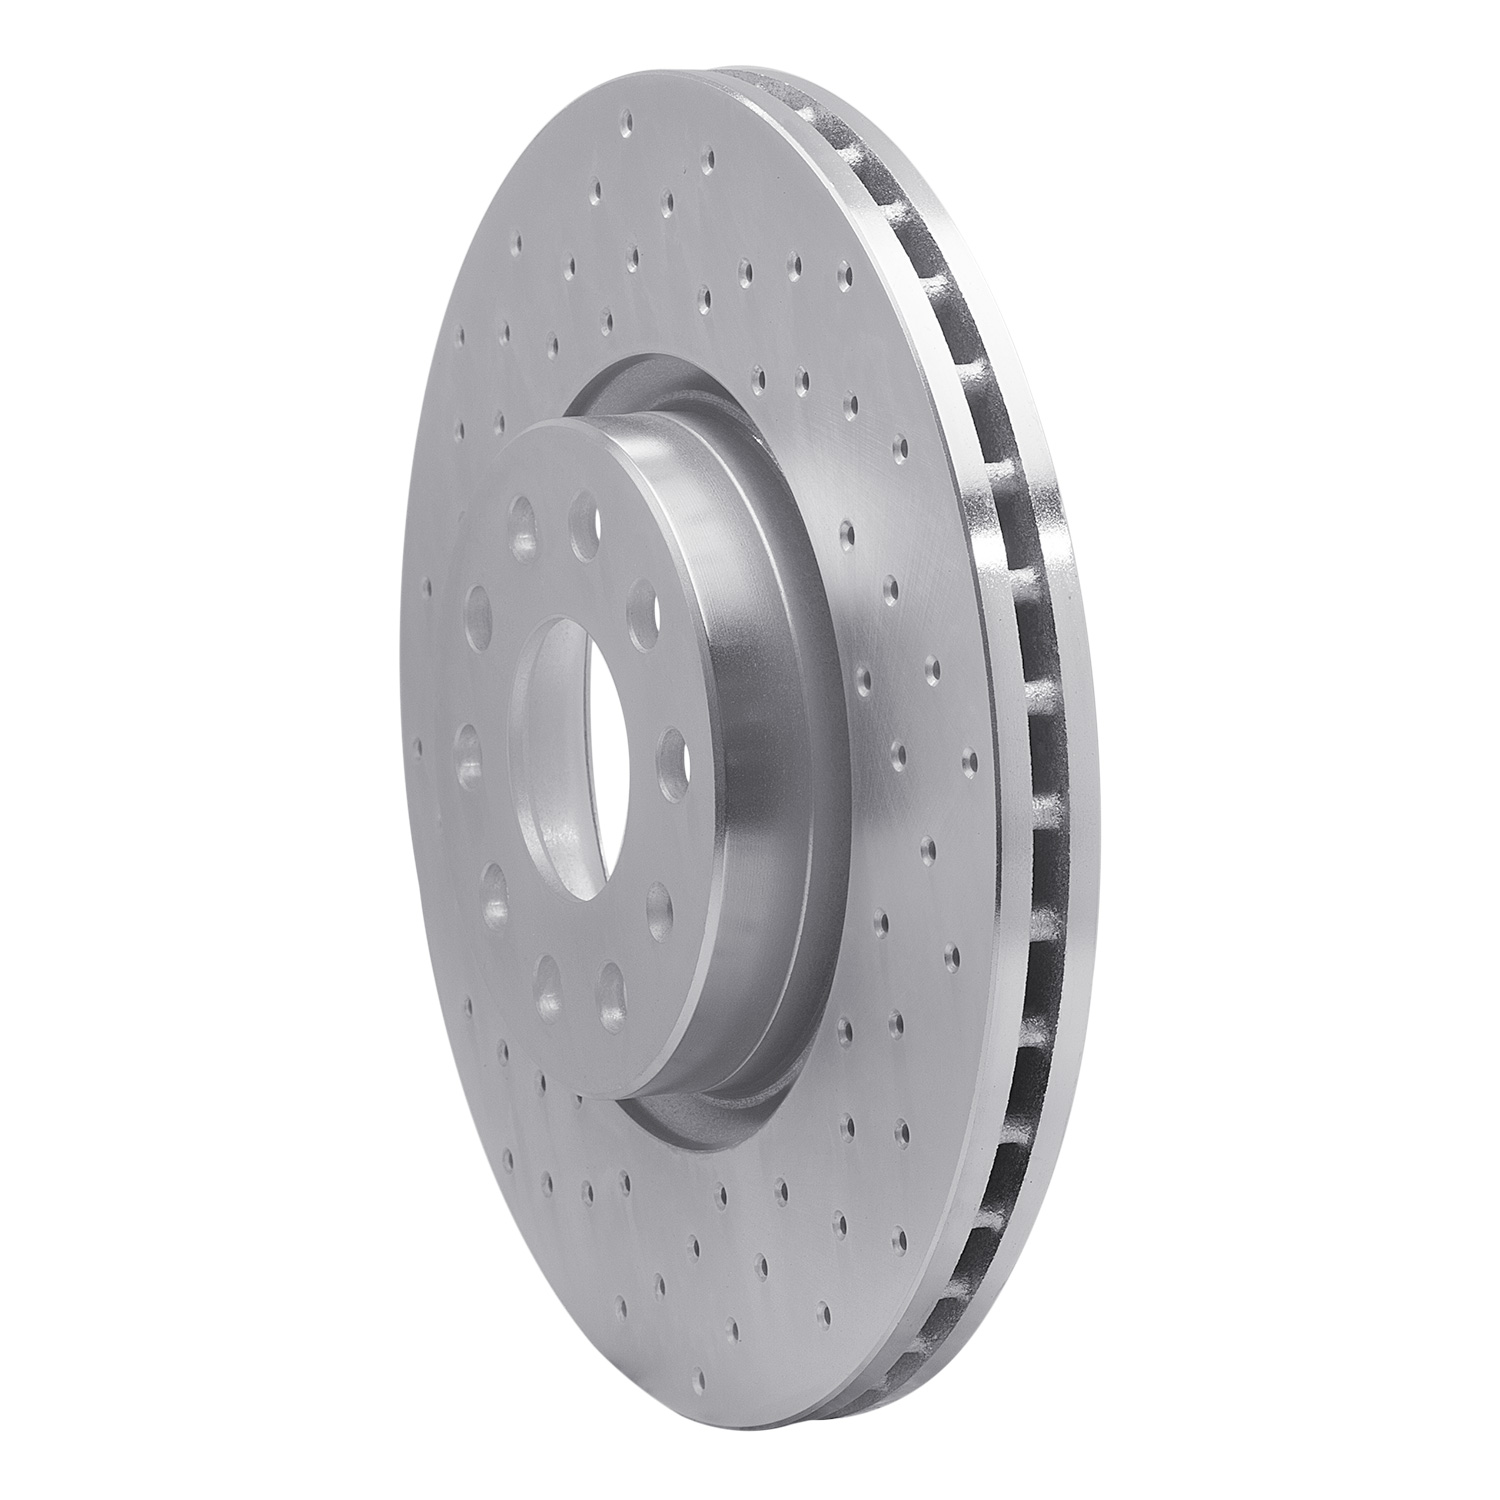 Drilled Brake Rotor [Silver], Fits Select Multiple Makes/Models